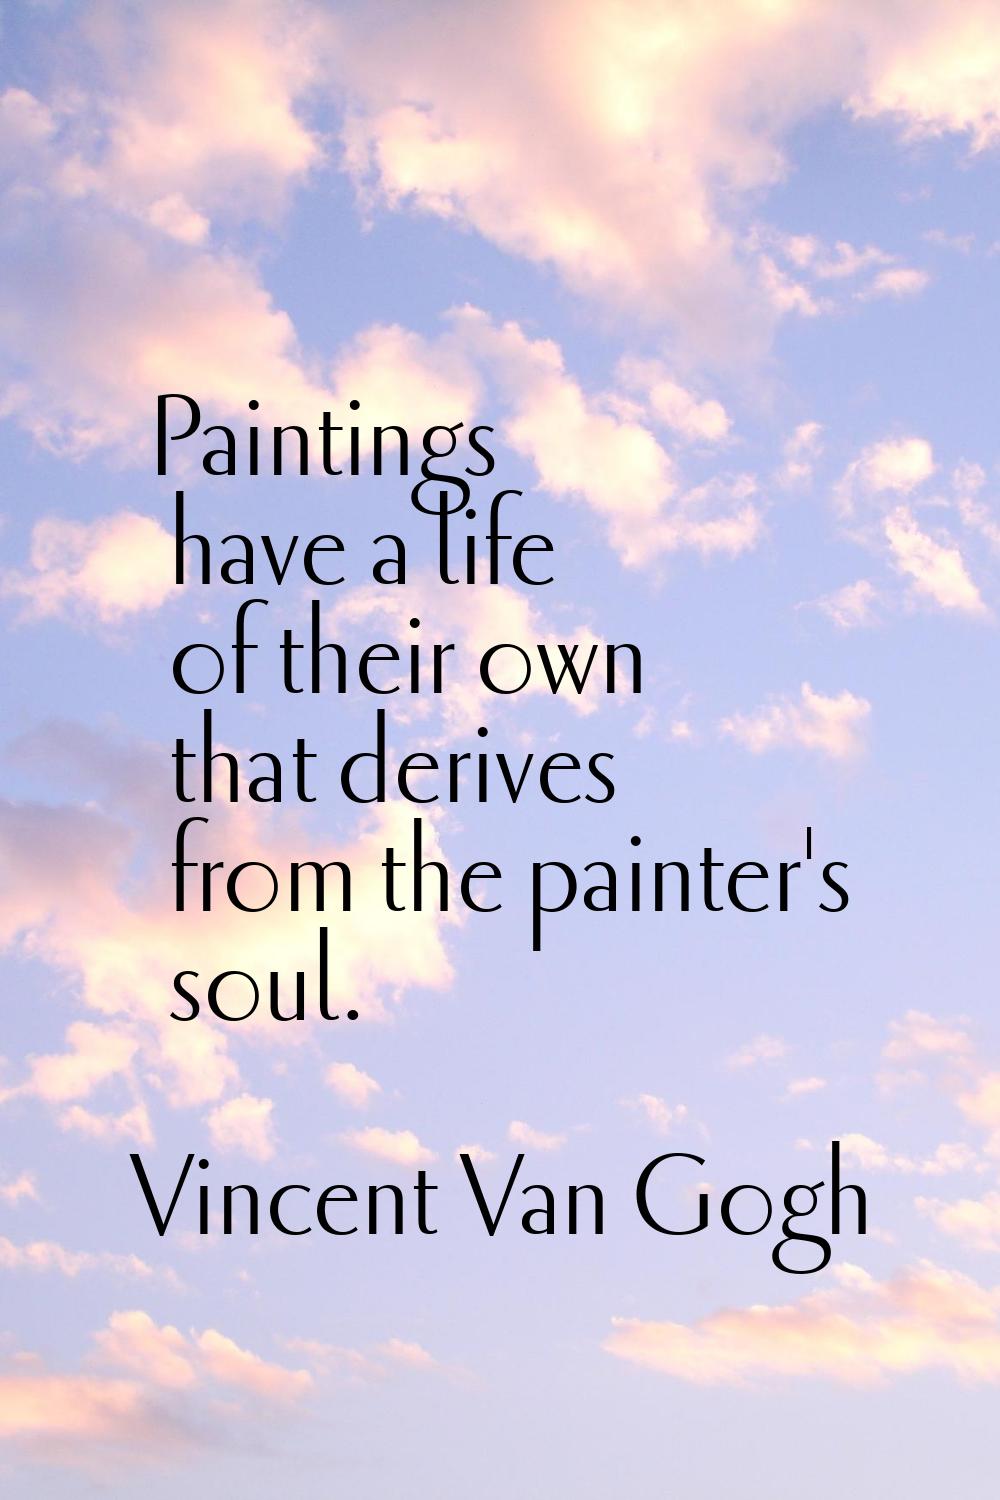 Paintings have a life of their own that derives from the painter's soul.